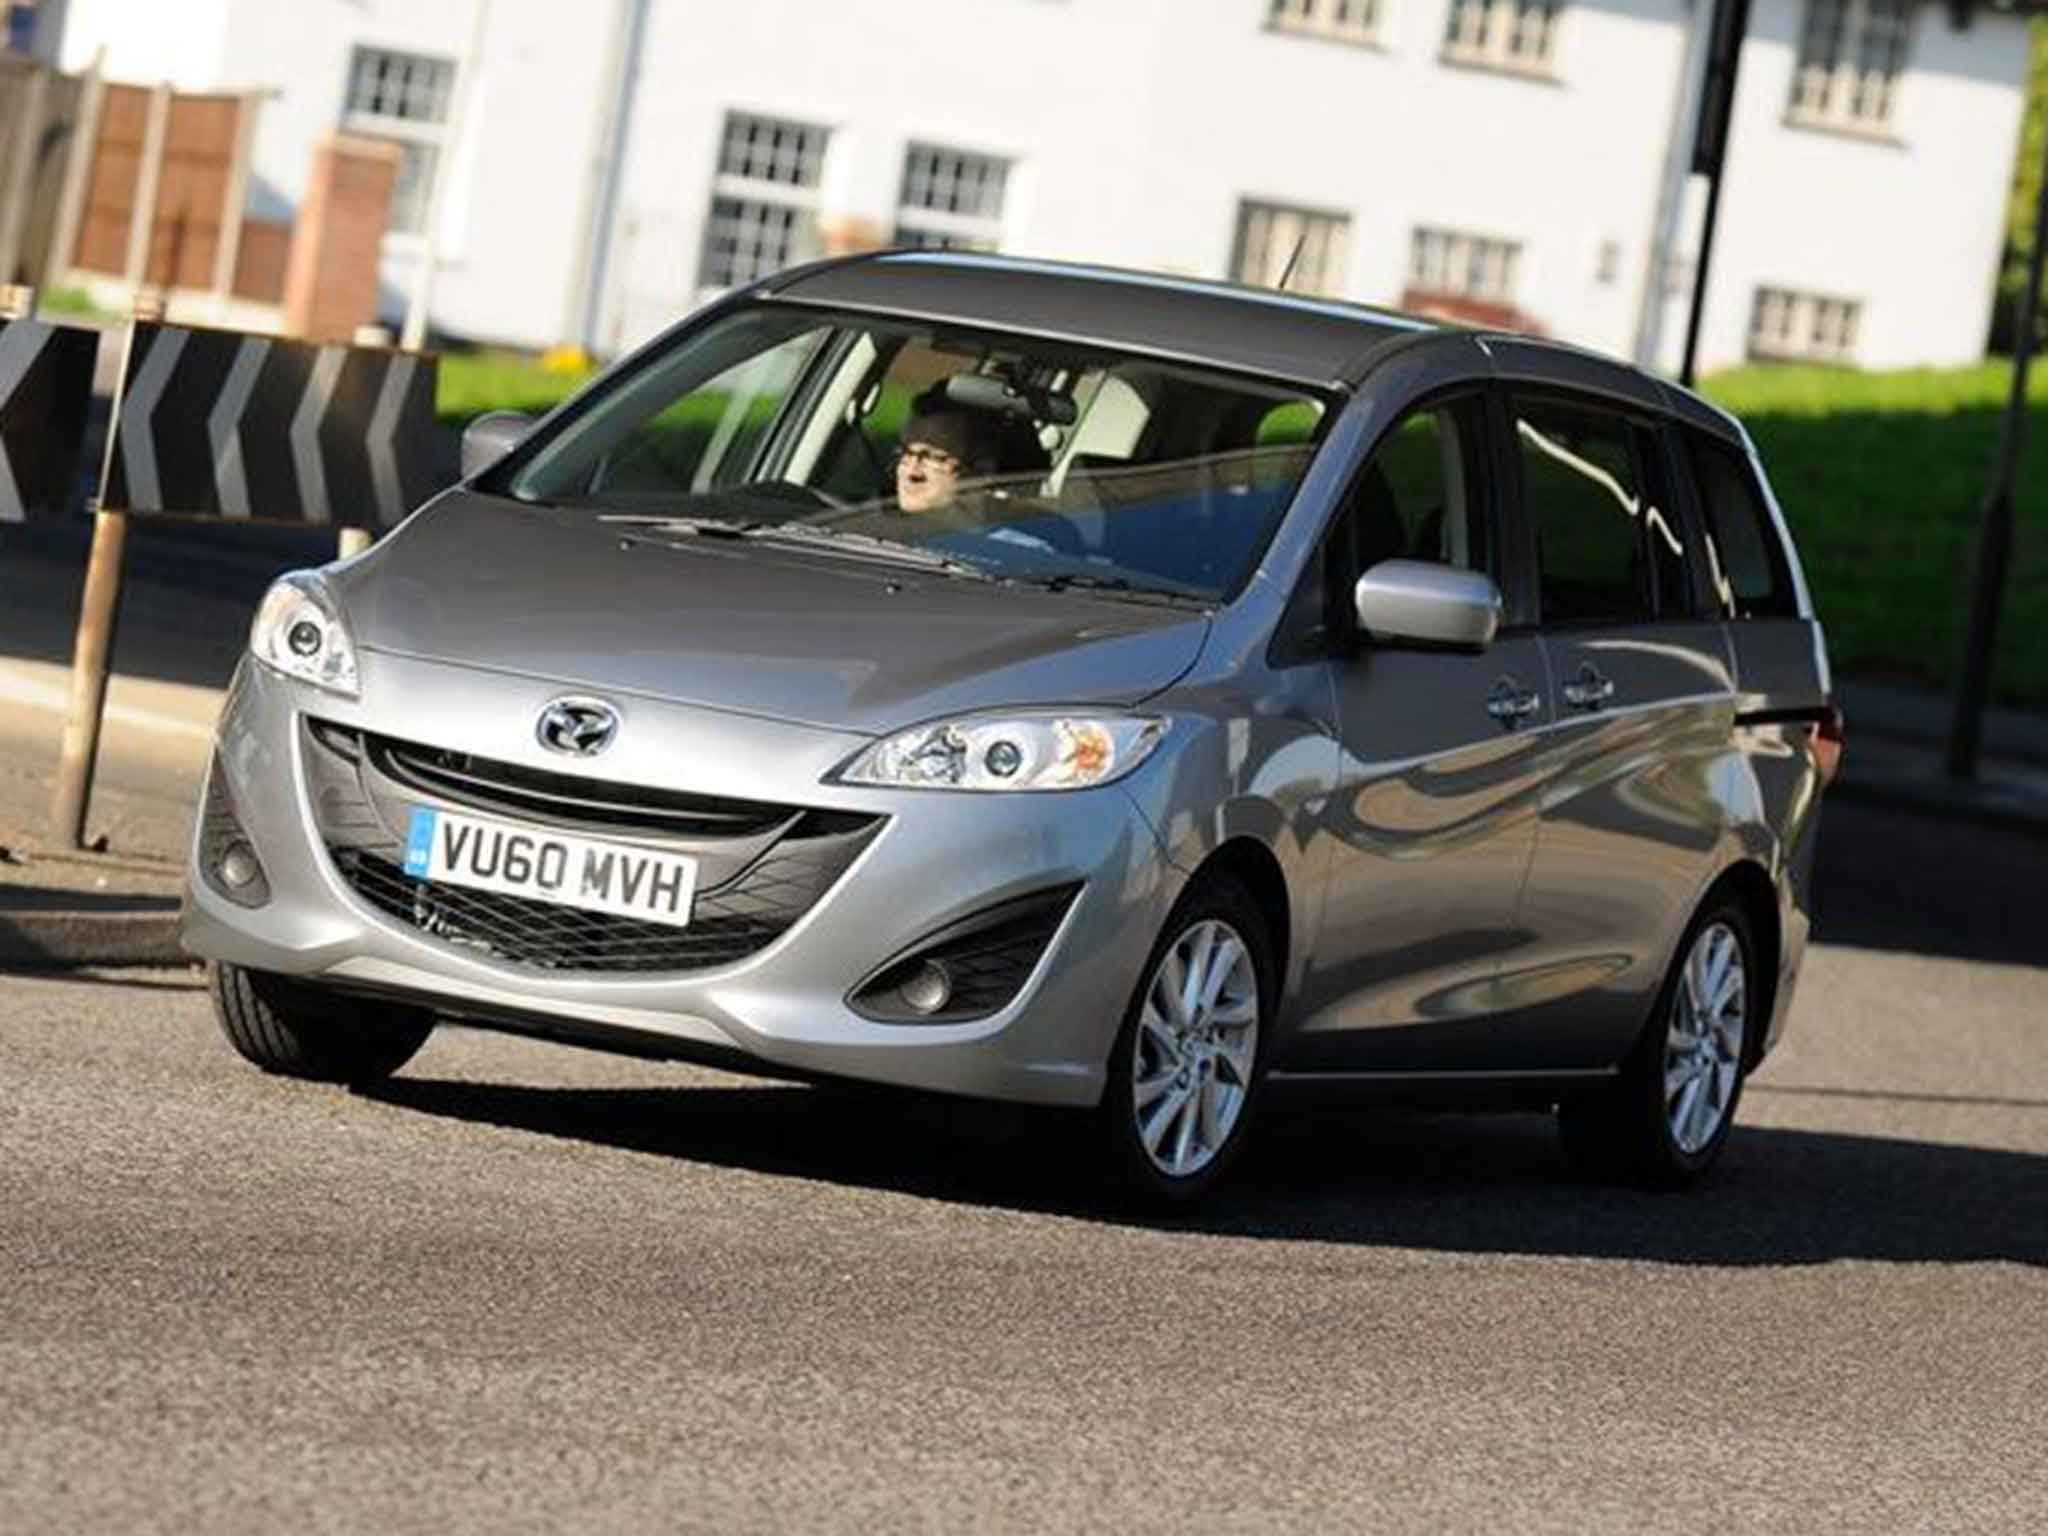 The Mazda 5 doesn’t excel at anything you’d notice